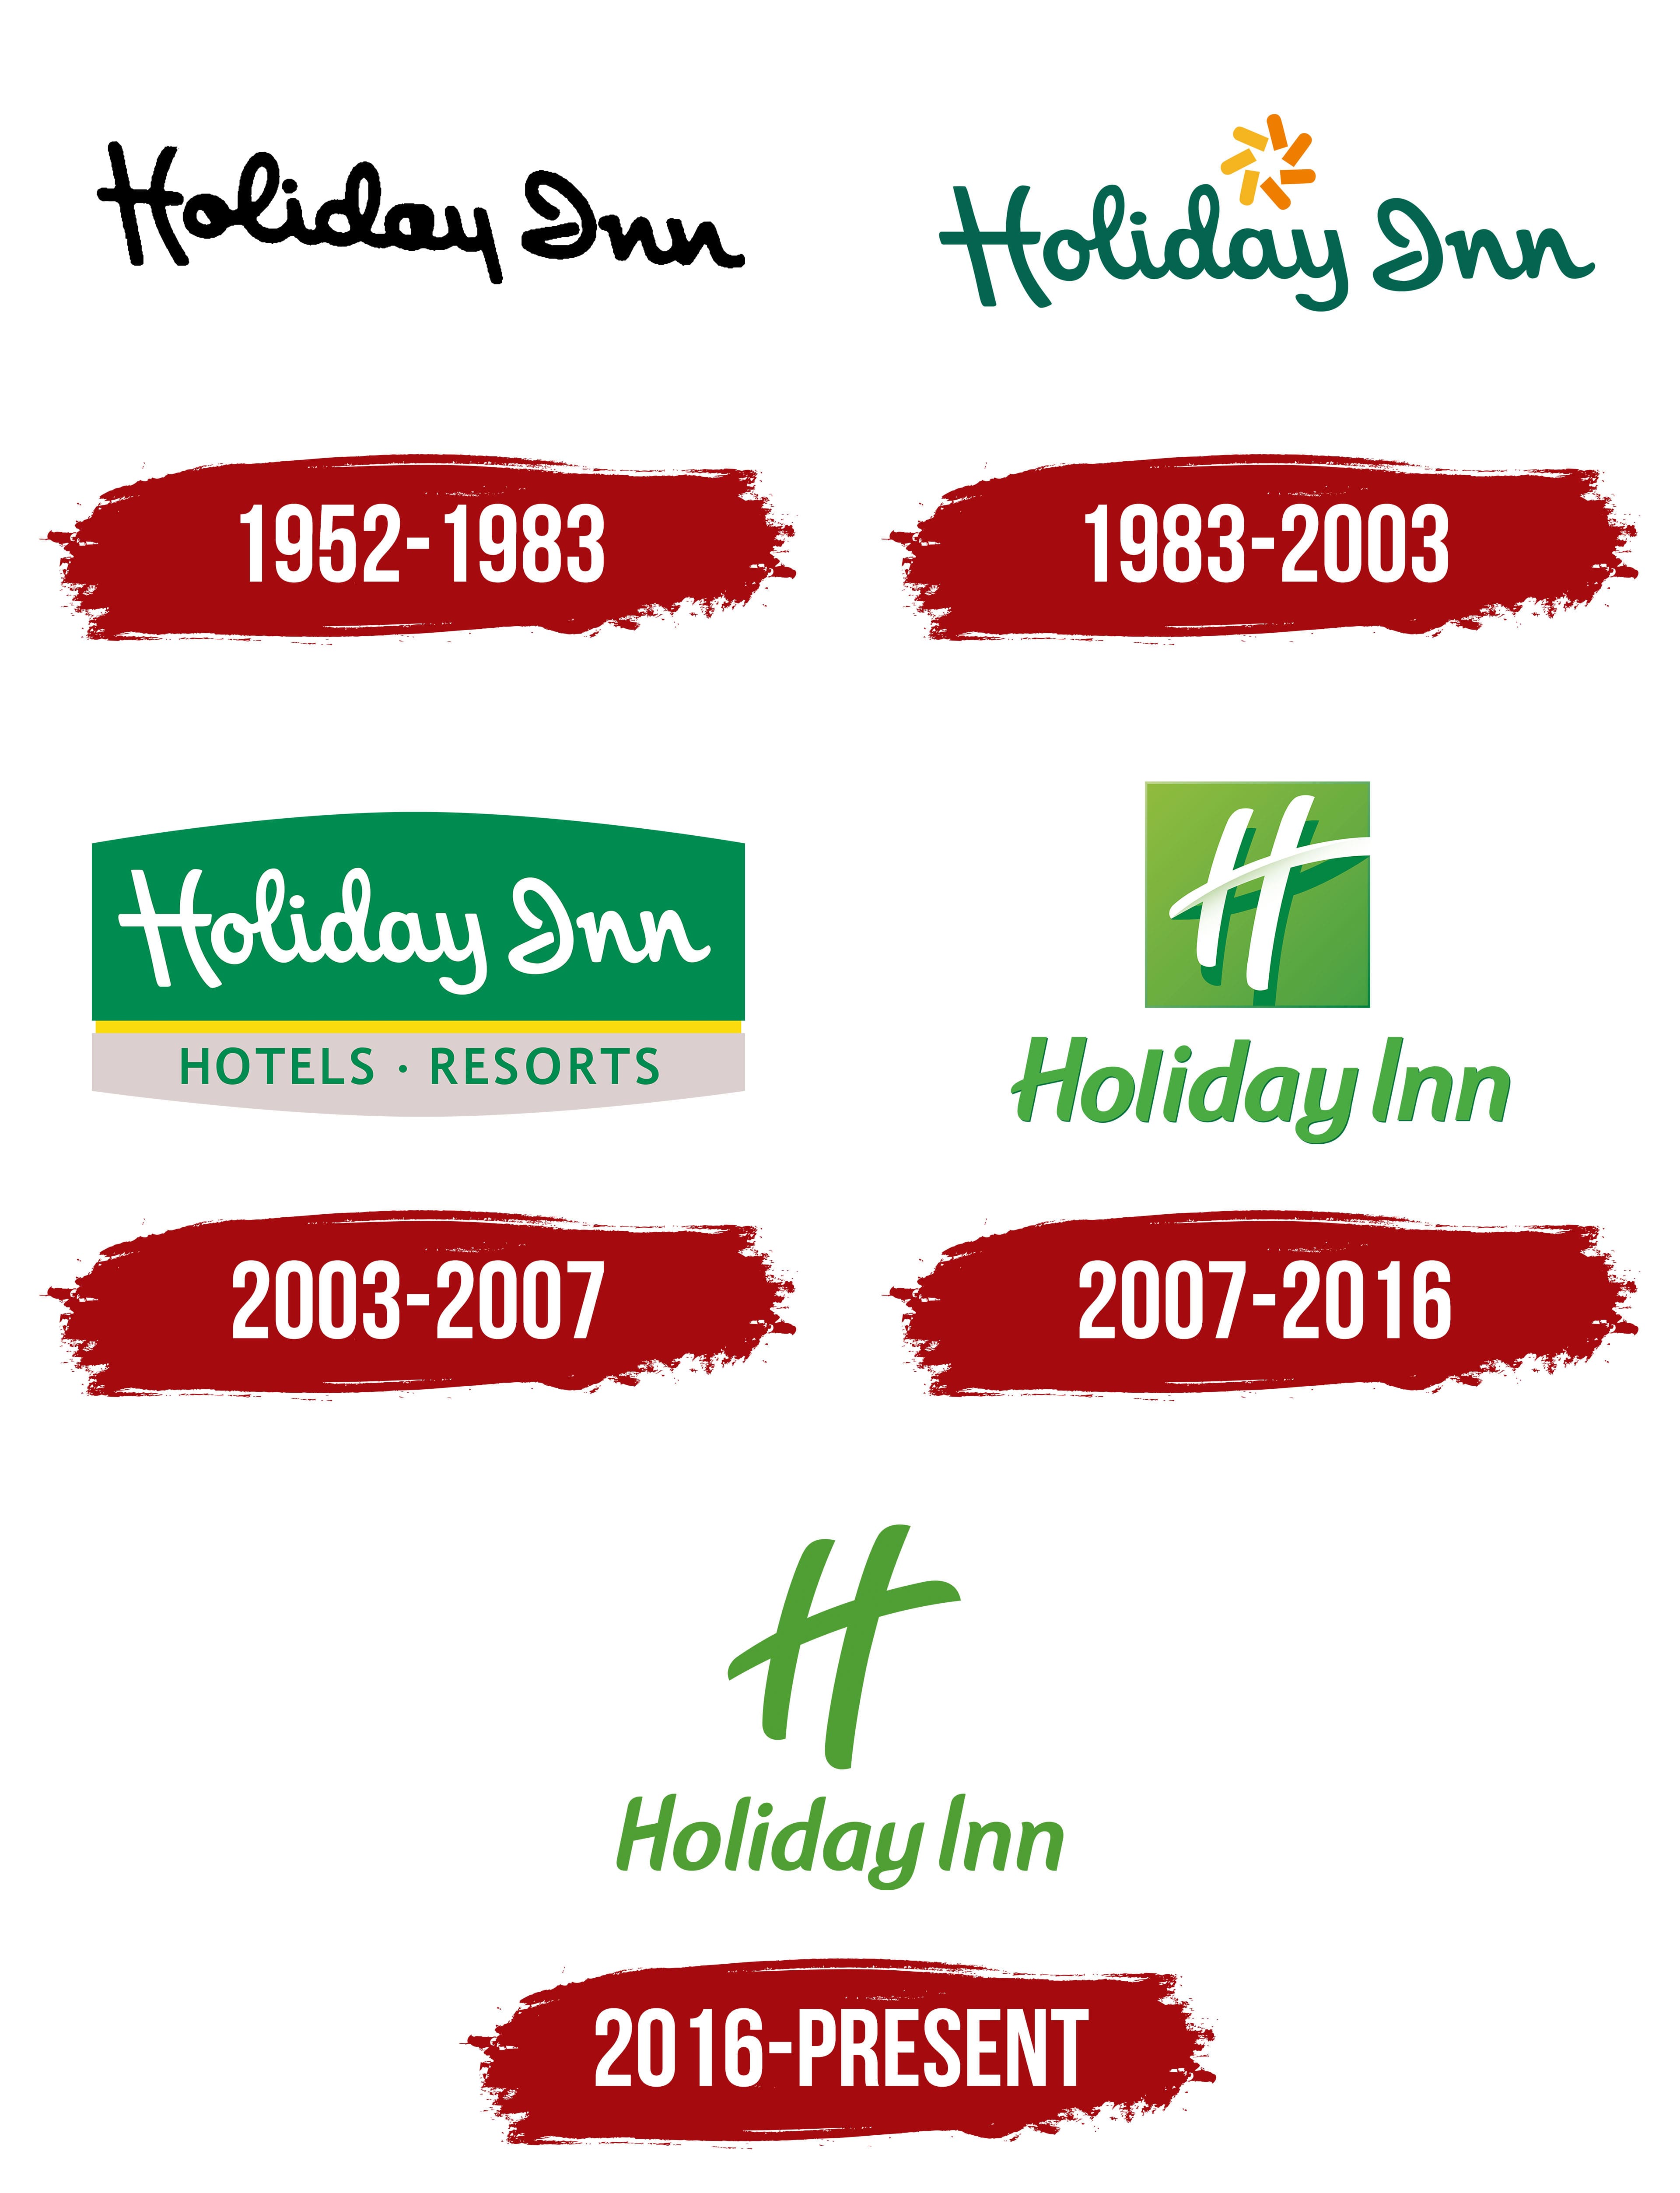 Holiday Inn Logo, symbol, meaning, history, PNG, brand